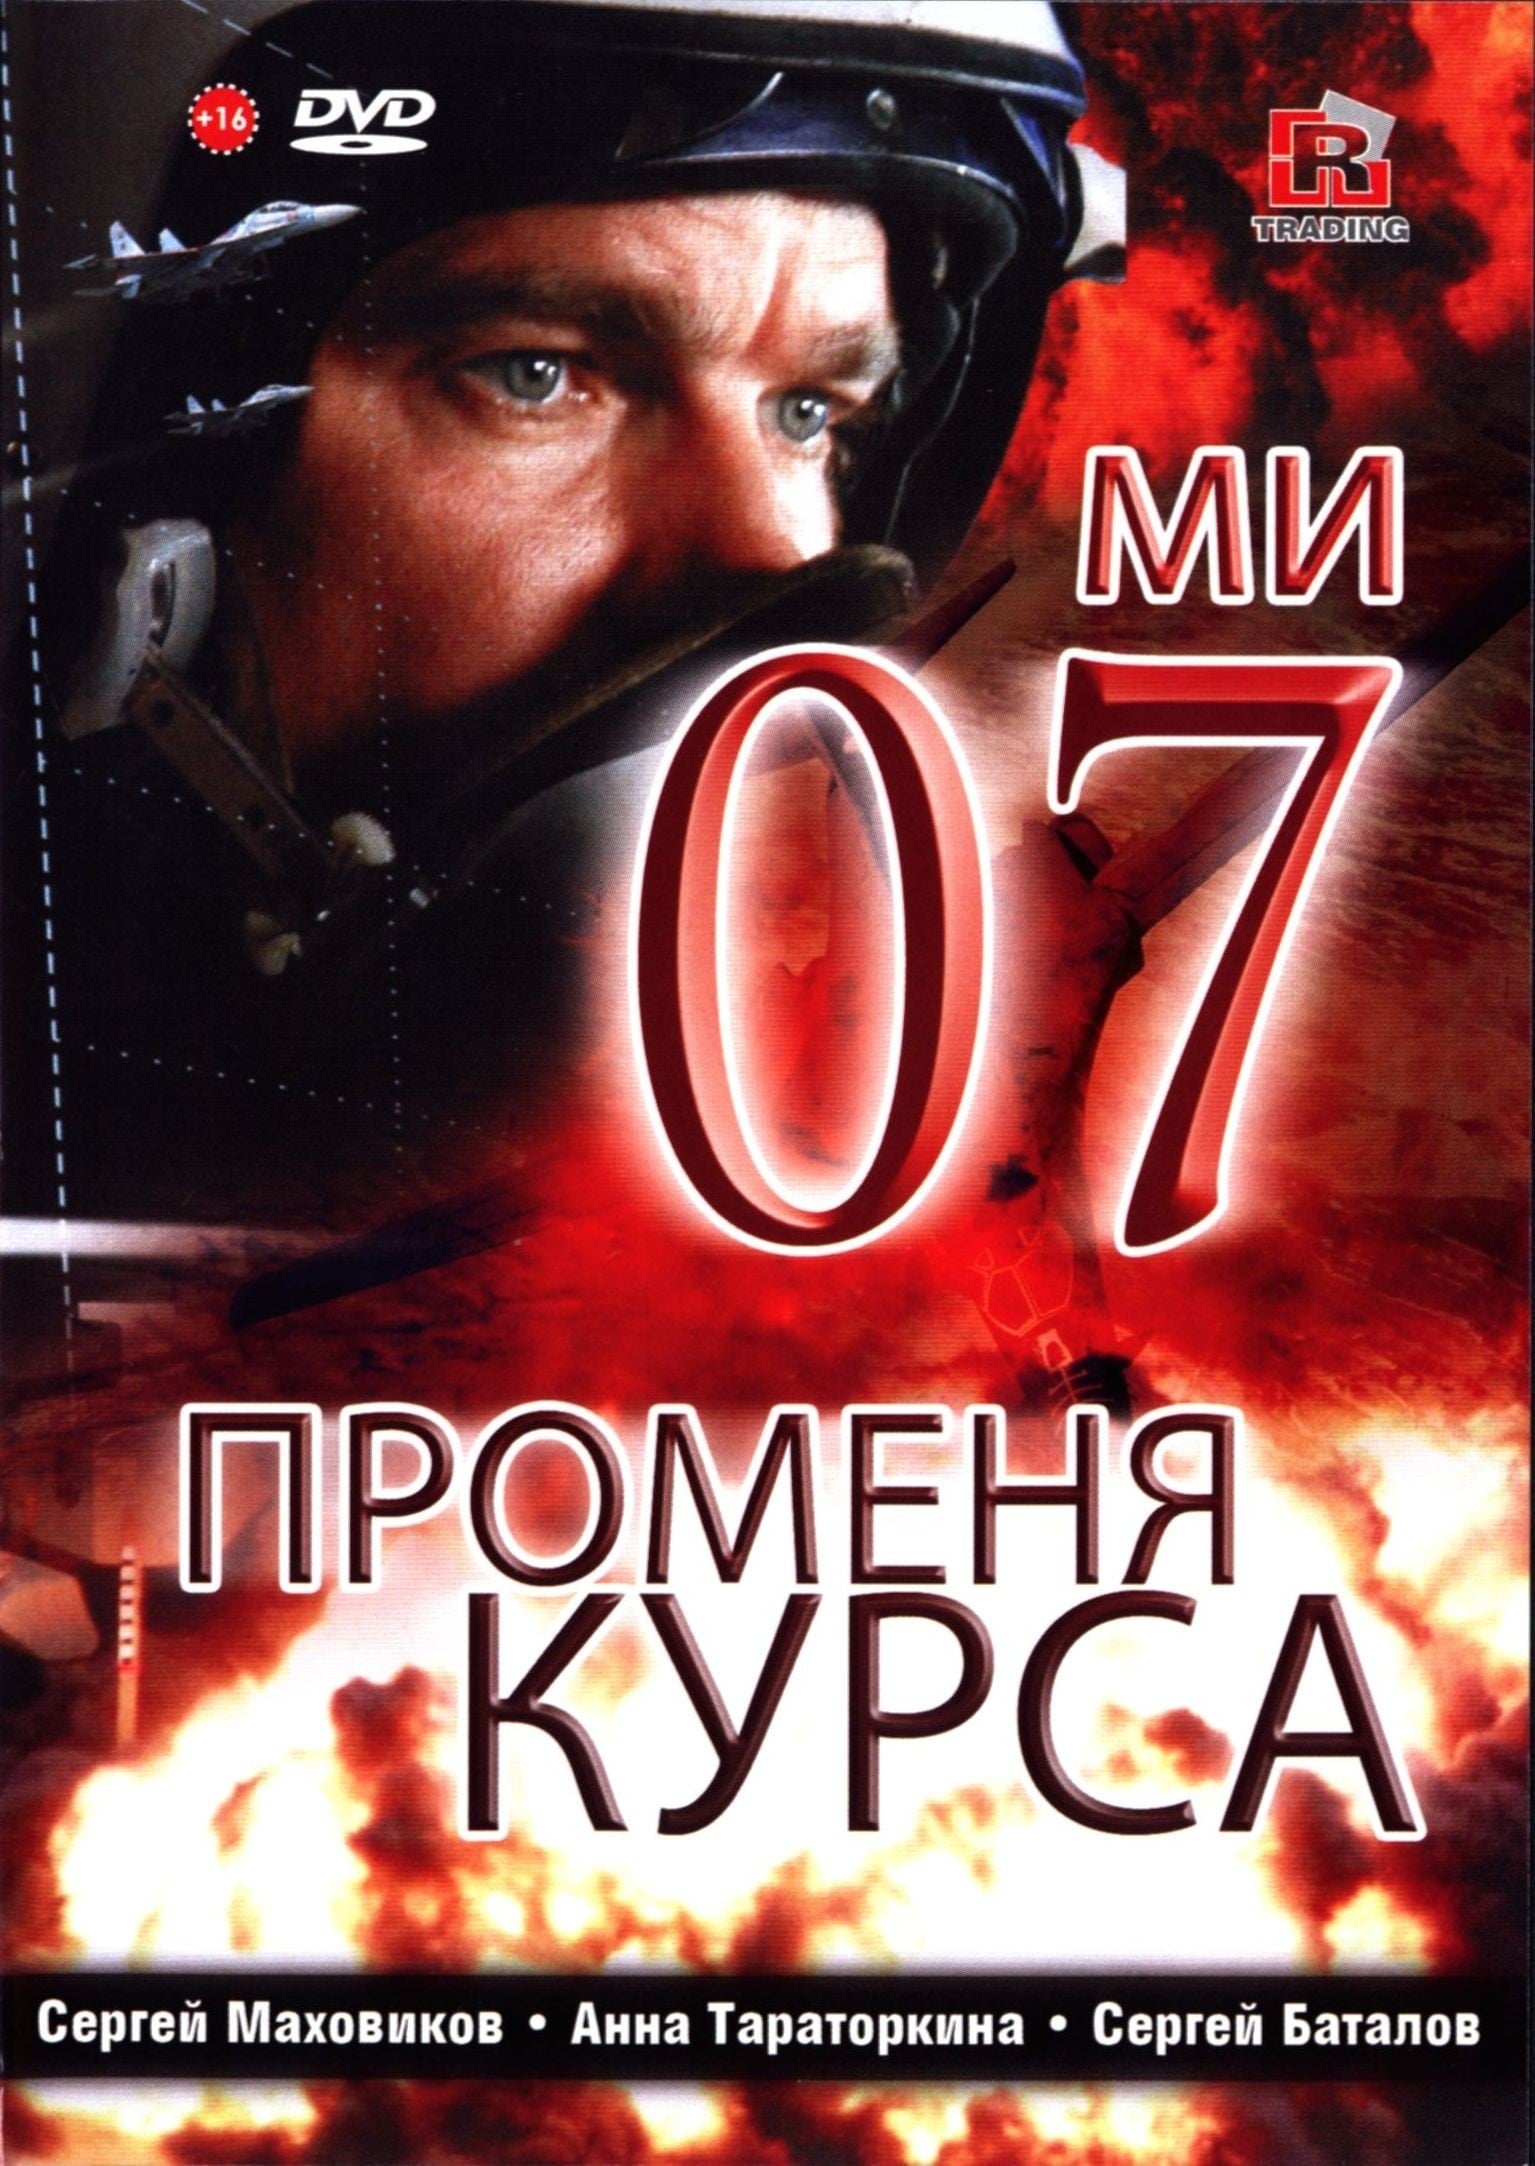 07th Changes Course (2007)